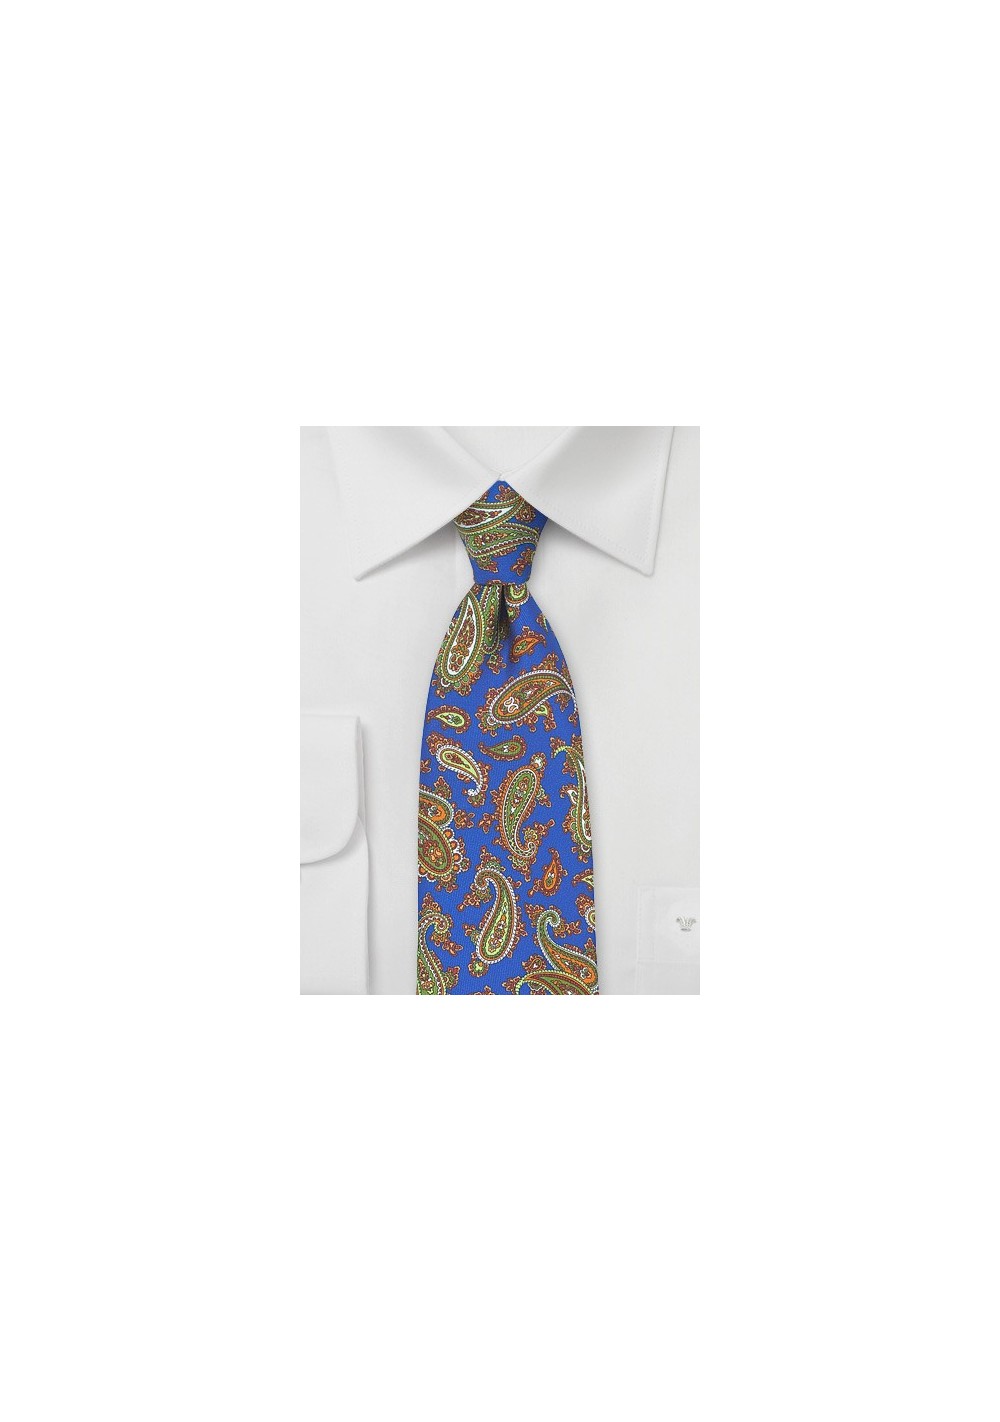 French Paisley Tie in Horizon Blue and Green